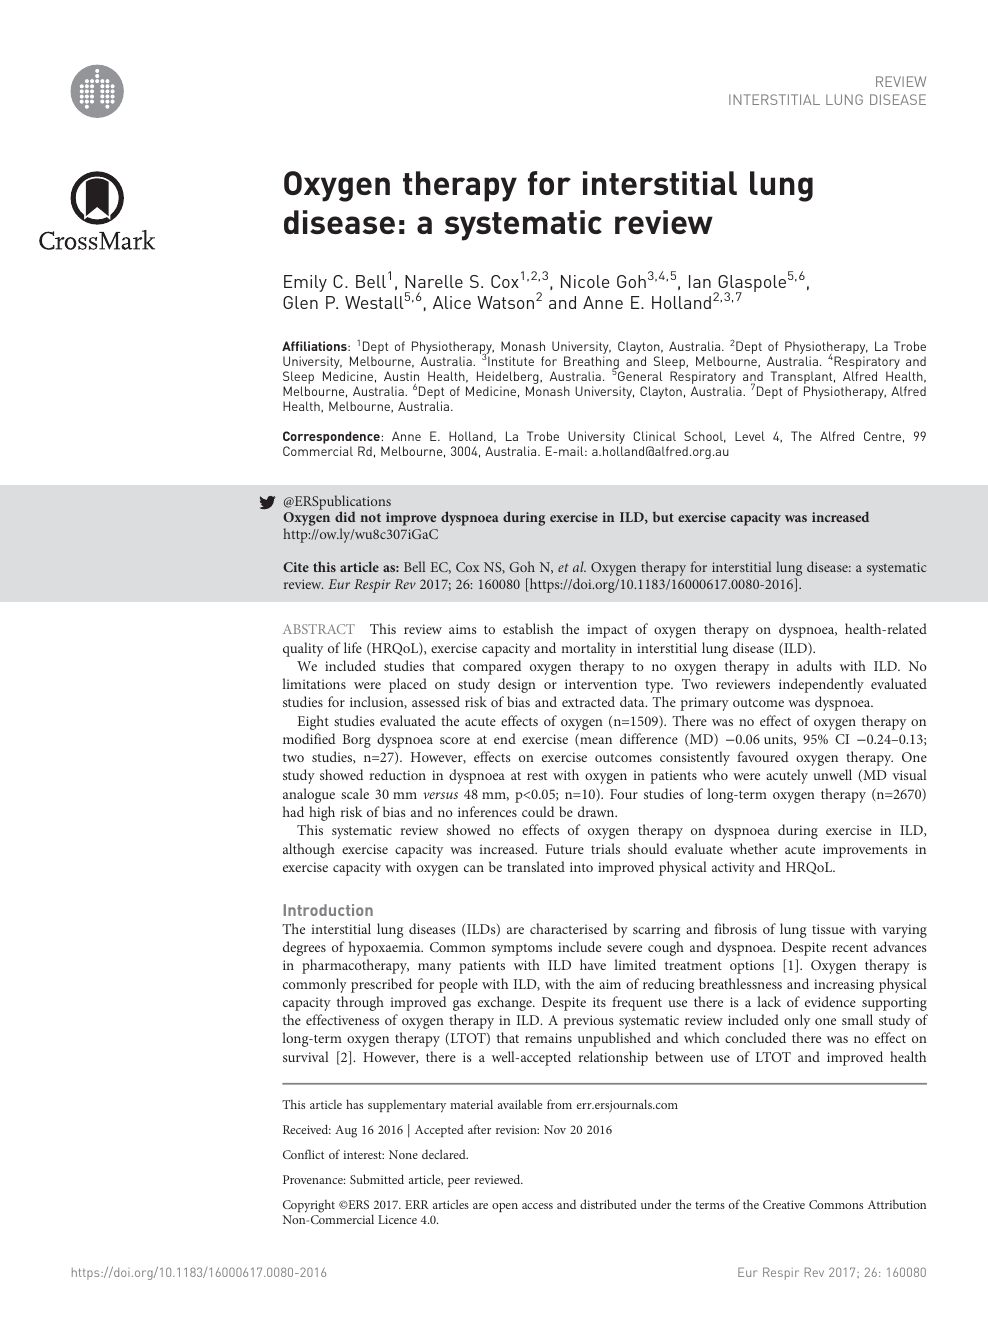 Oxygen Therapy For Interstitial Lung Disease A Systematic Review Topic Of Research Paper In Health Sciences Download Scholarly Article Pdf And Read For Free On Cyberleninka Open Science Hub